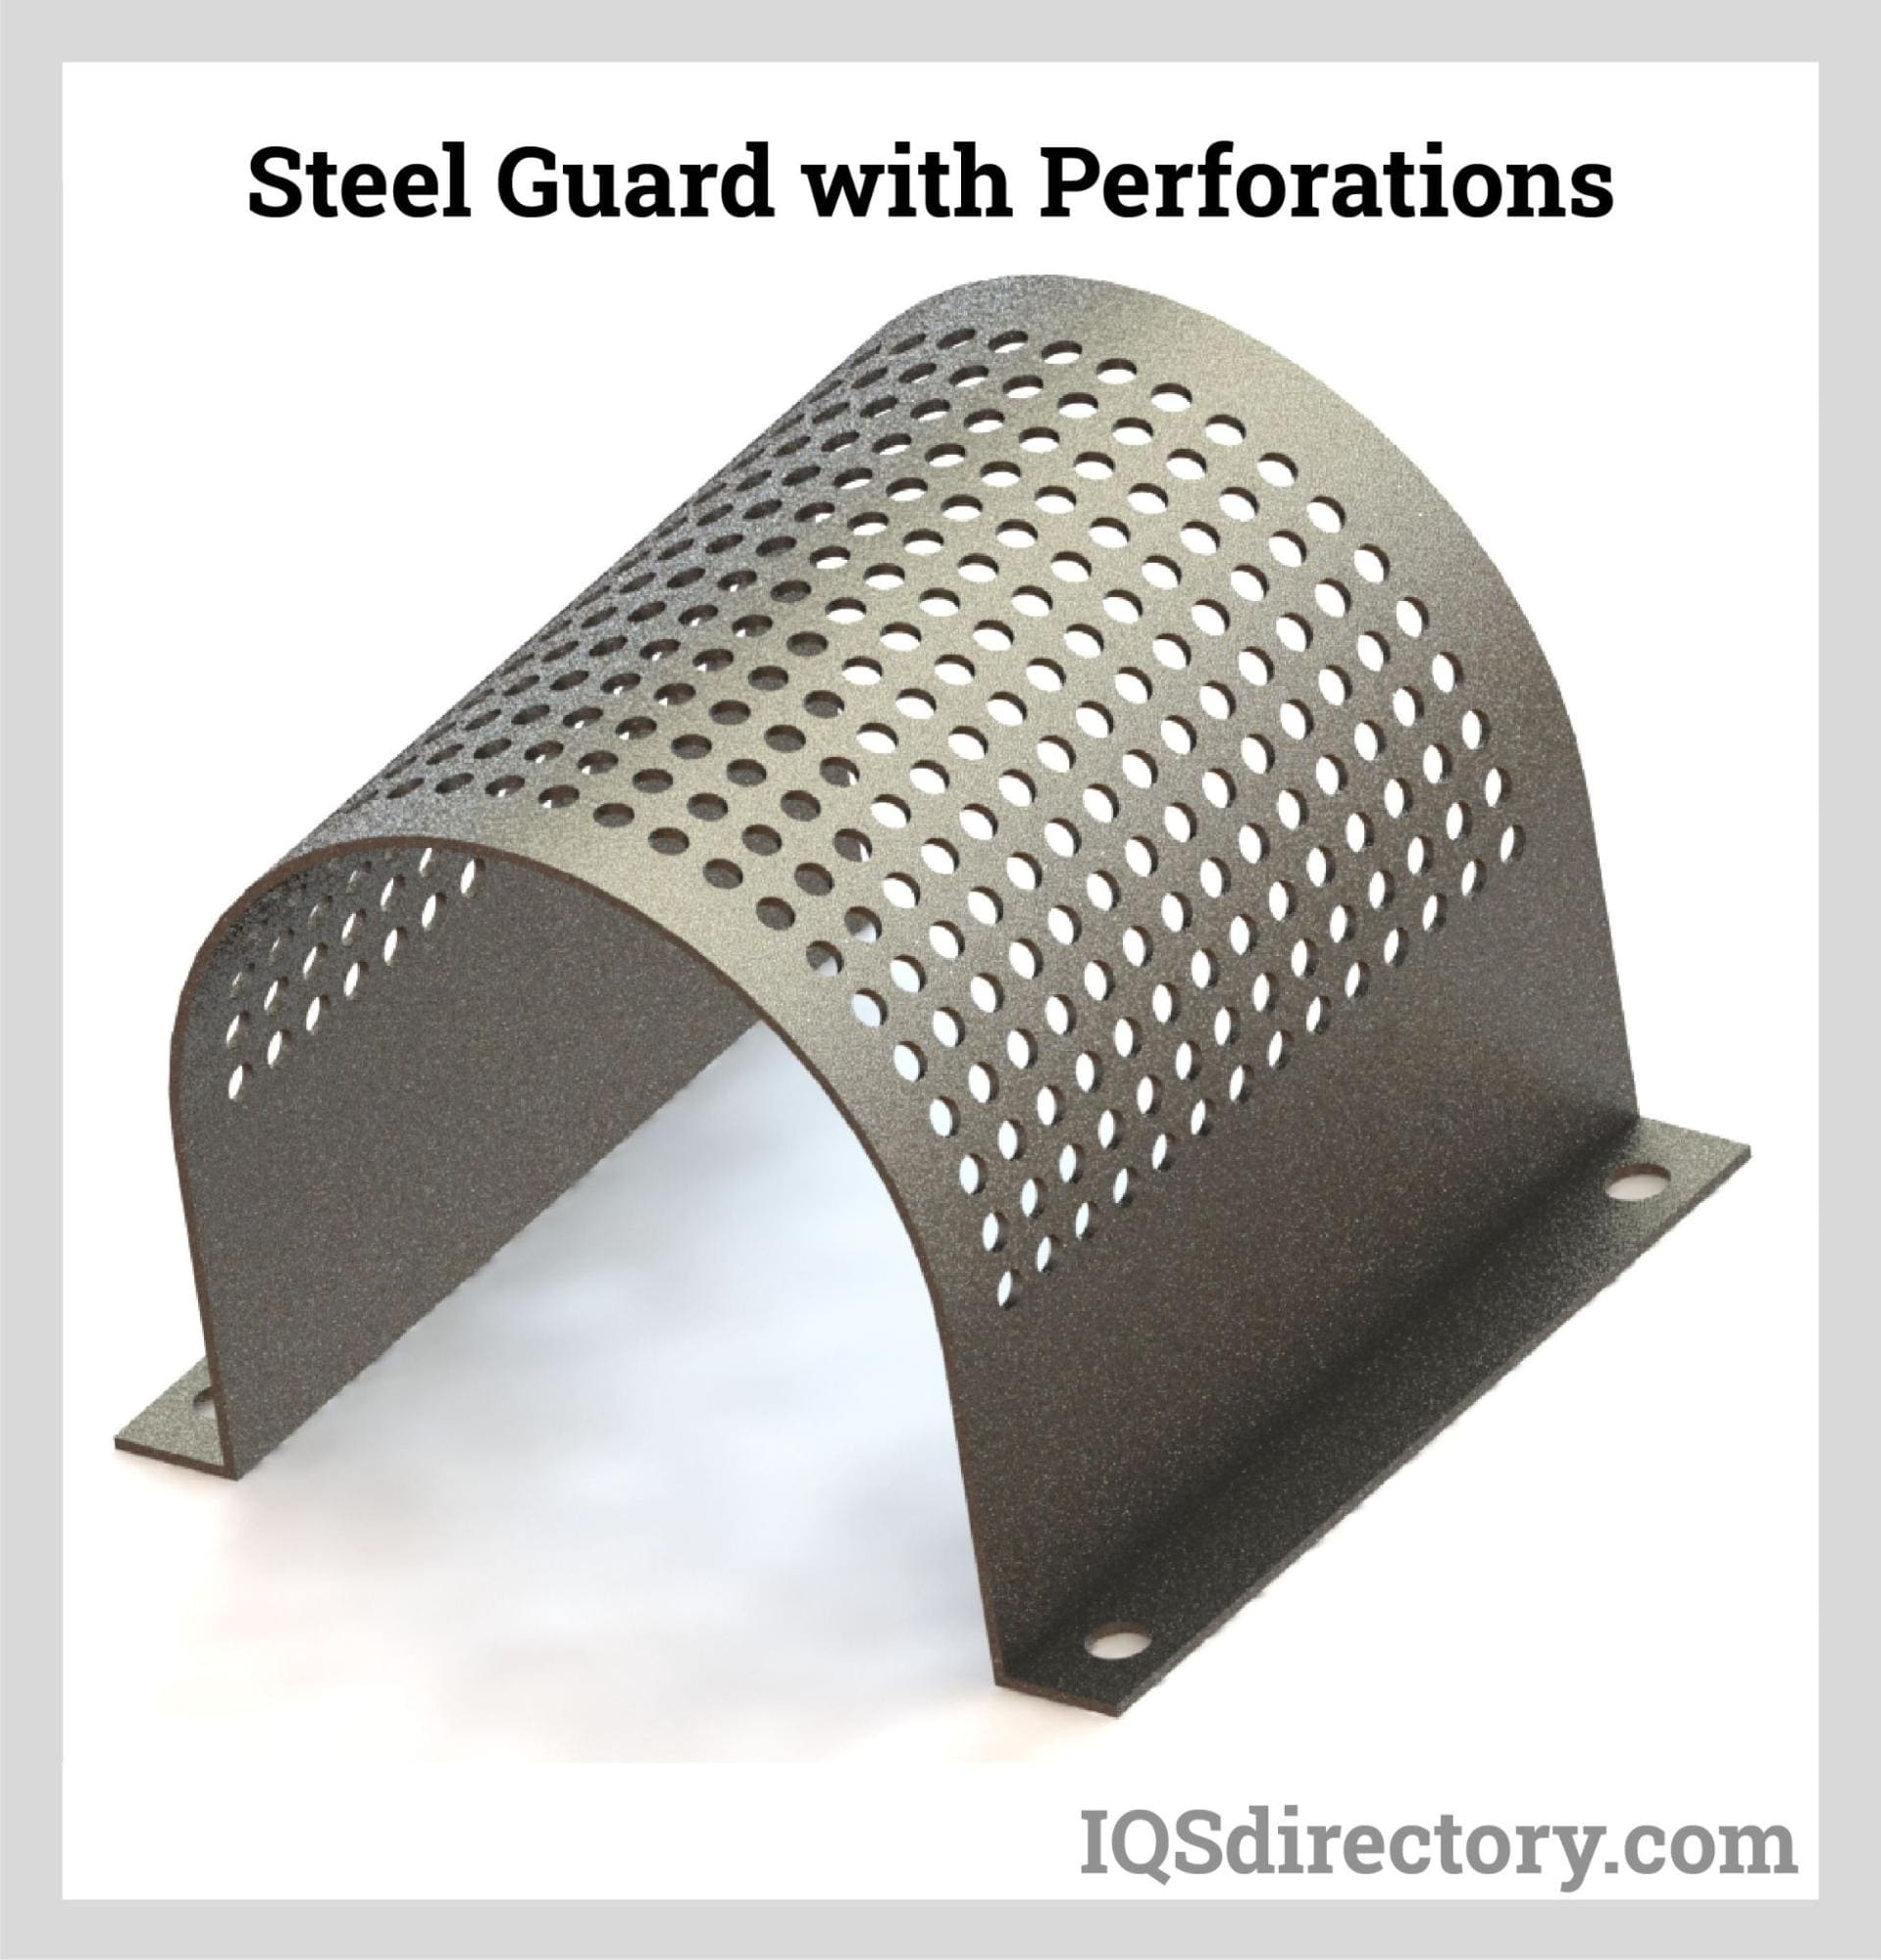 Steel Guard with Perforations